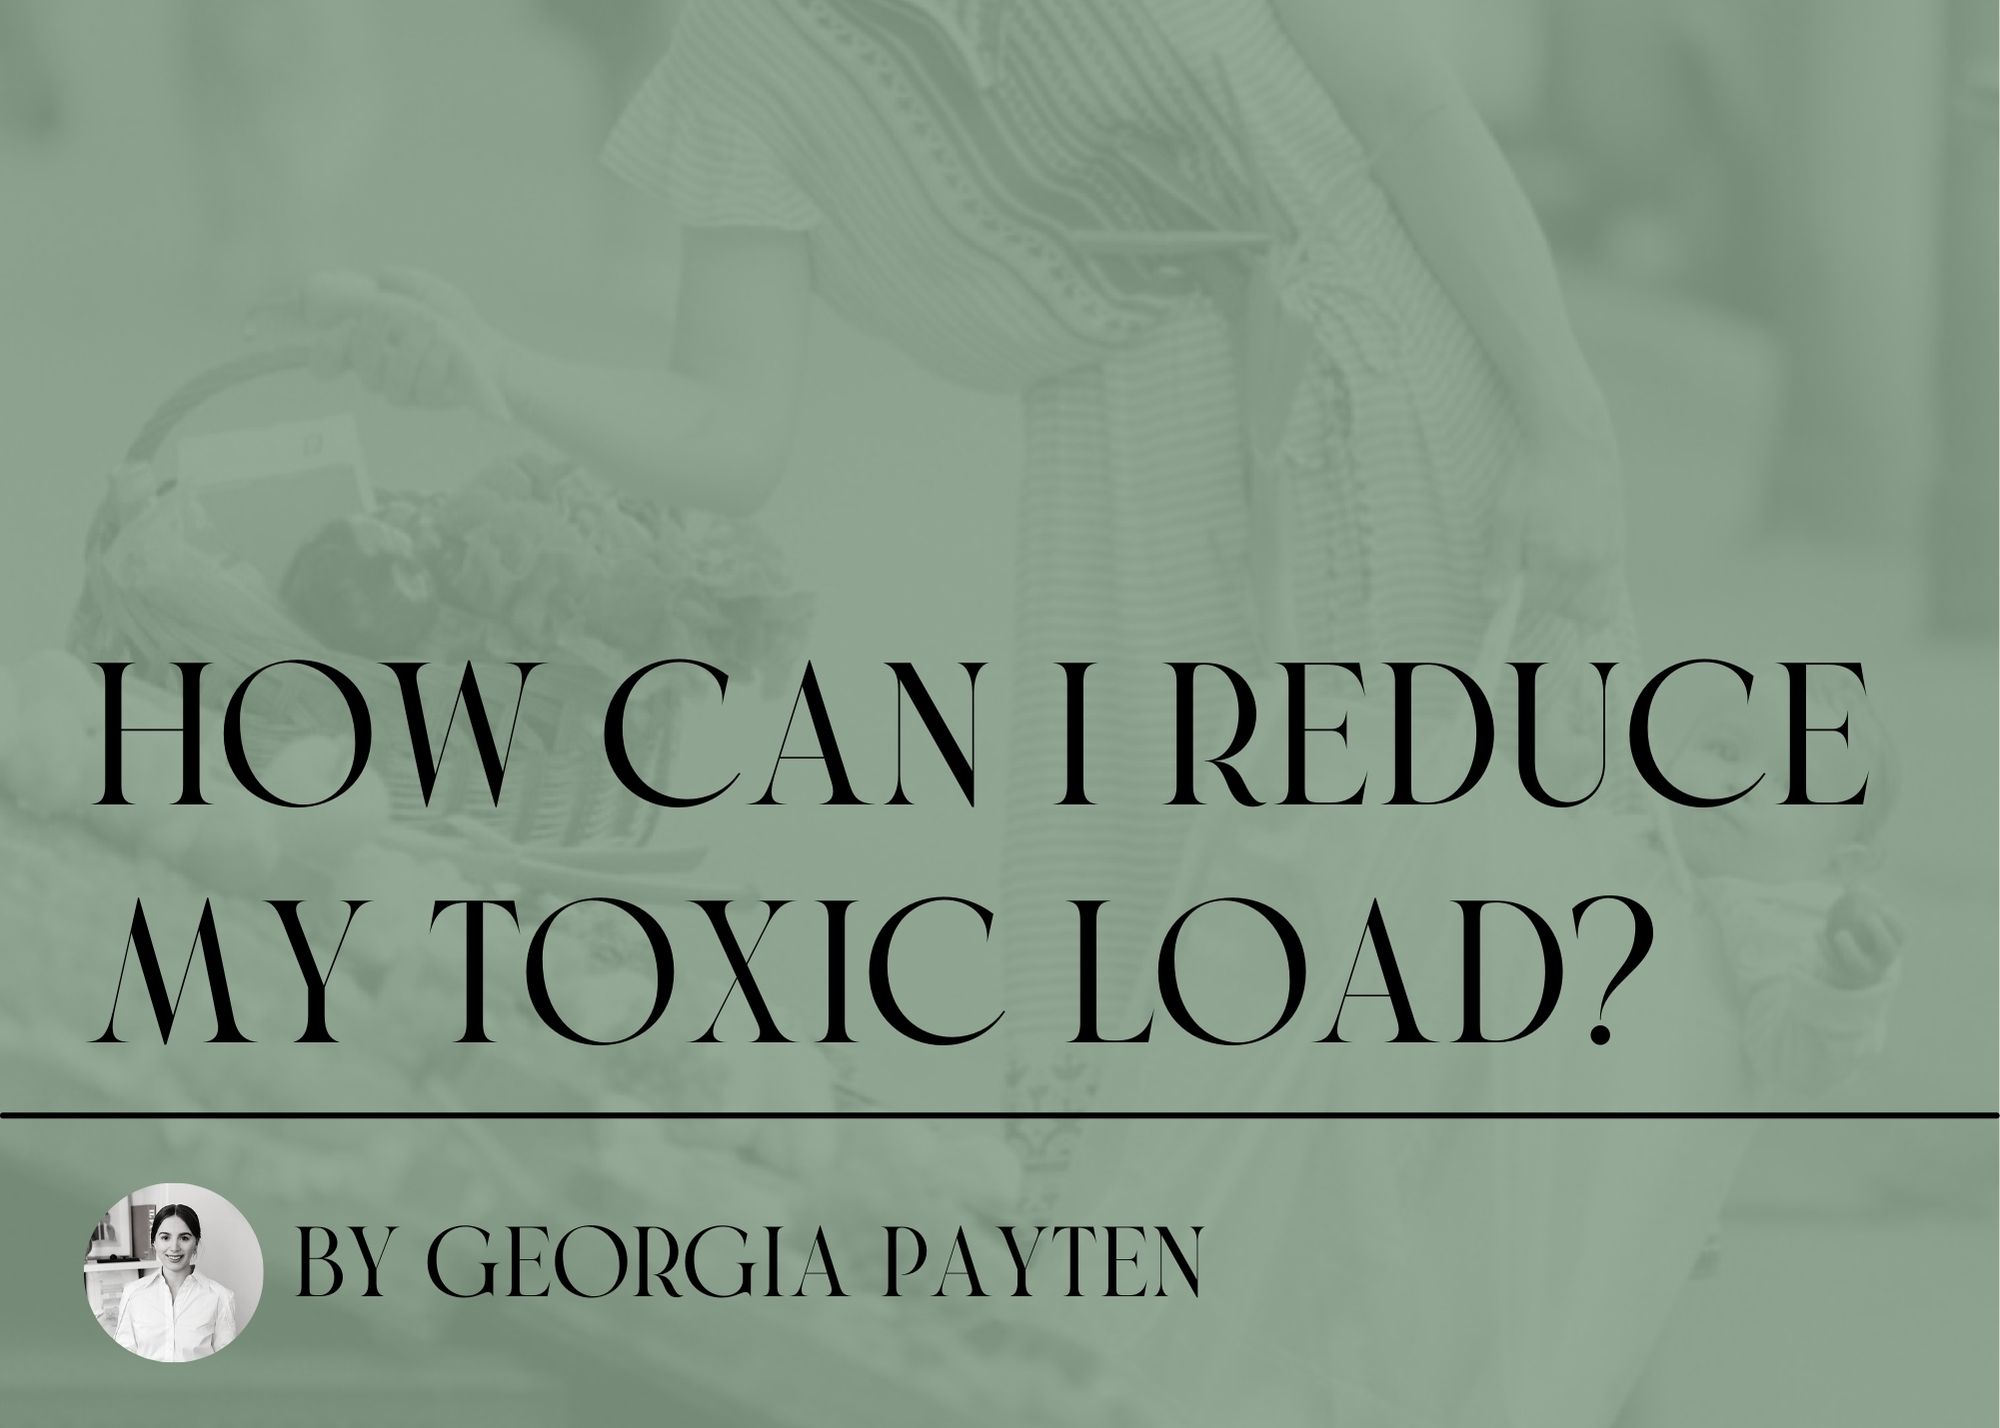 How can I reduce my toxic load?